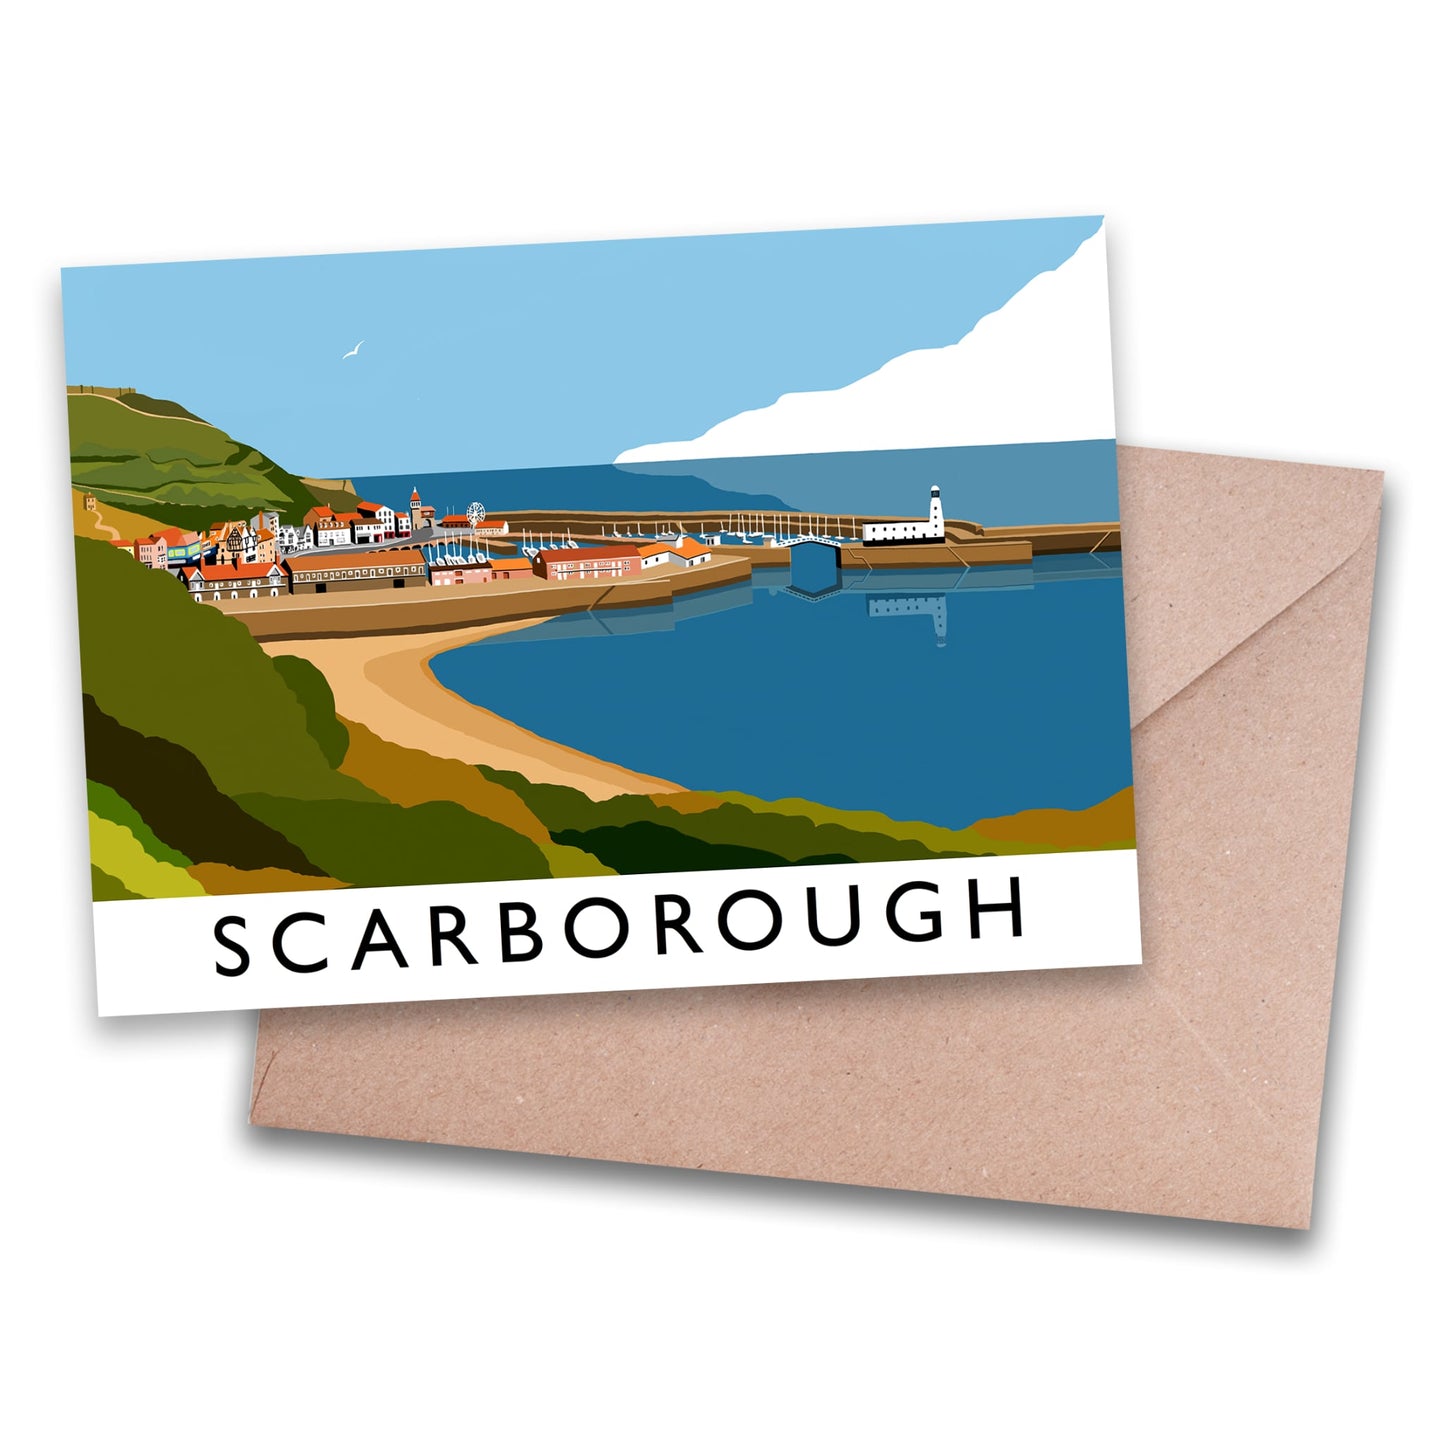 Scarborough Greeting Card - The Great Yorkshire Shop